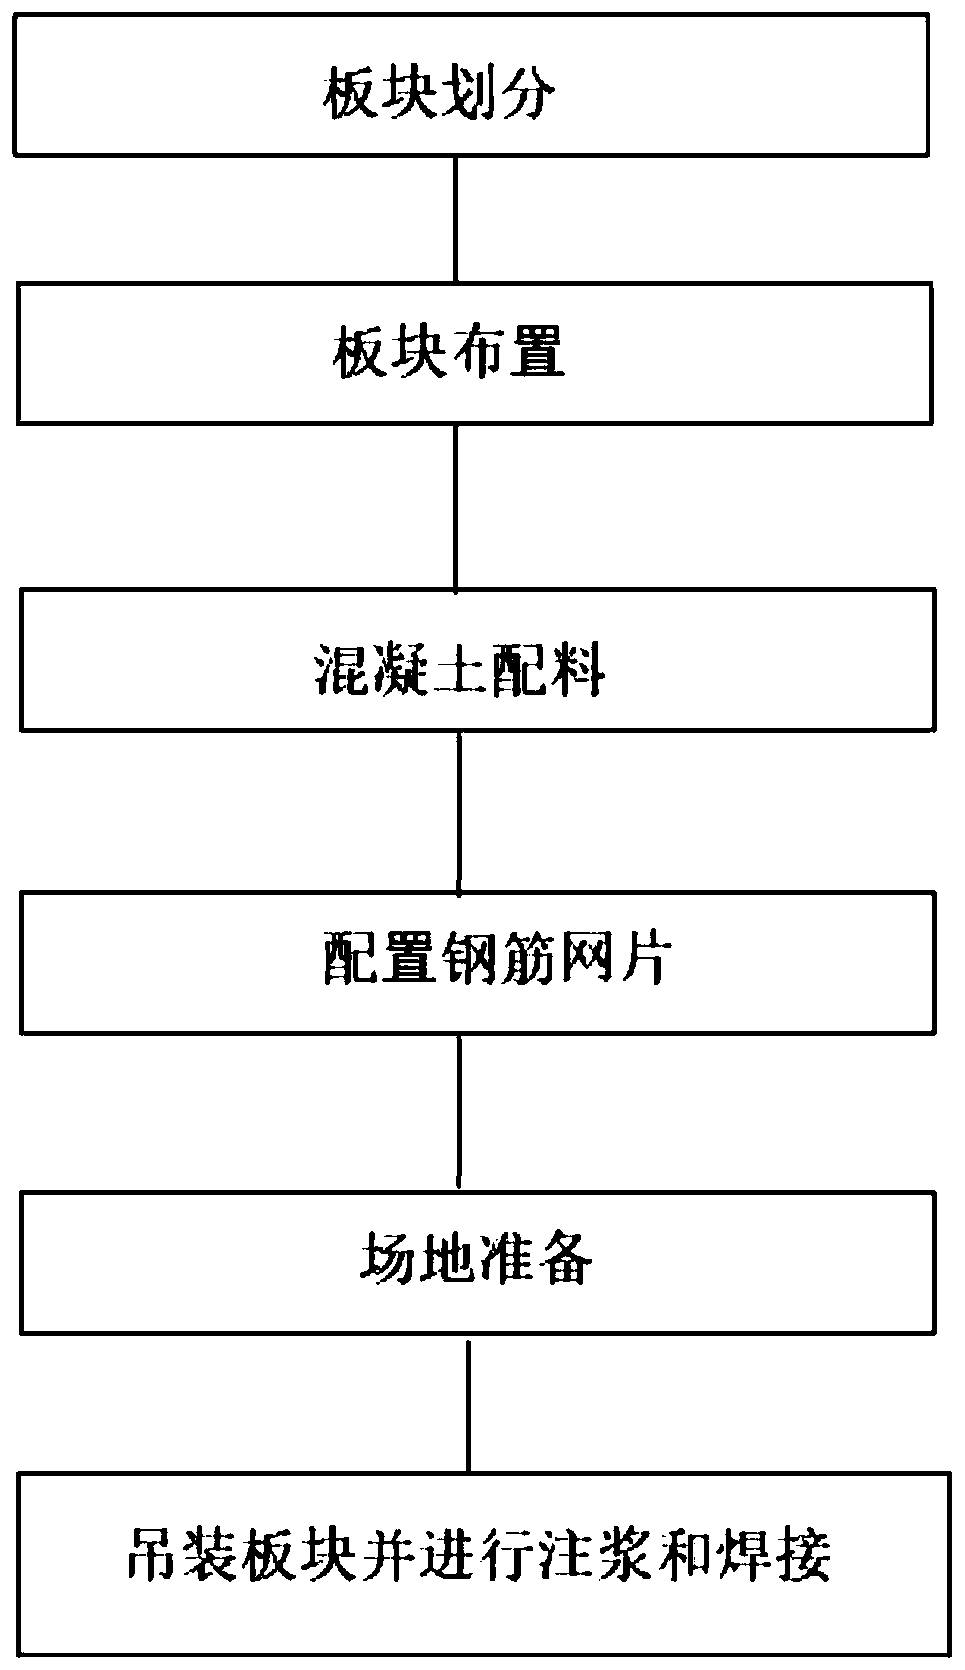 Prefabricated road process method with load monitoring module